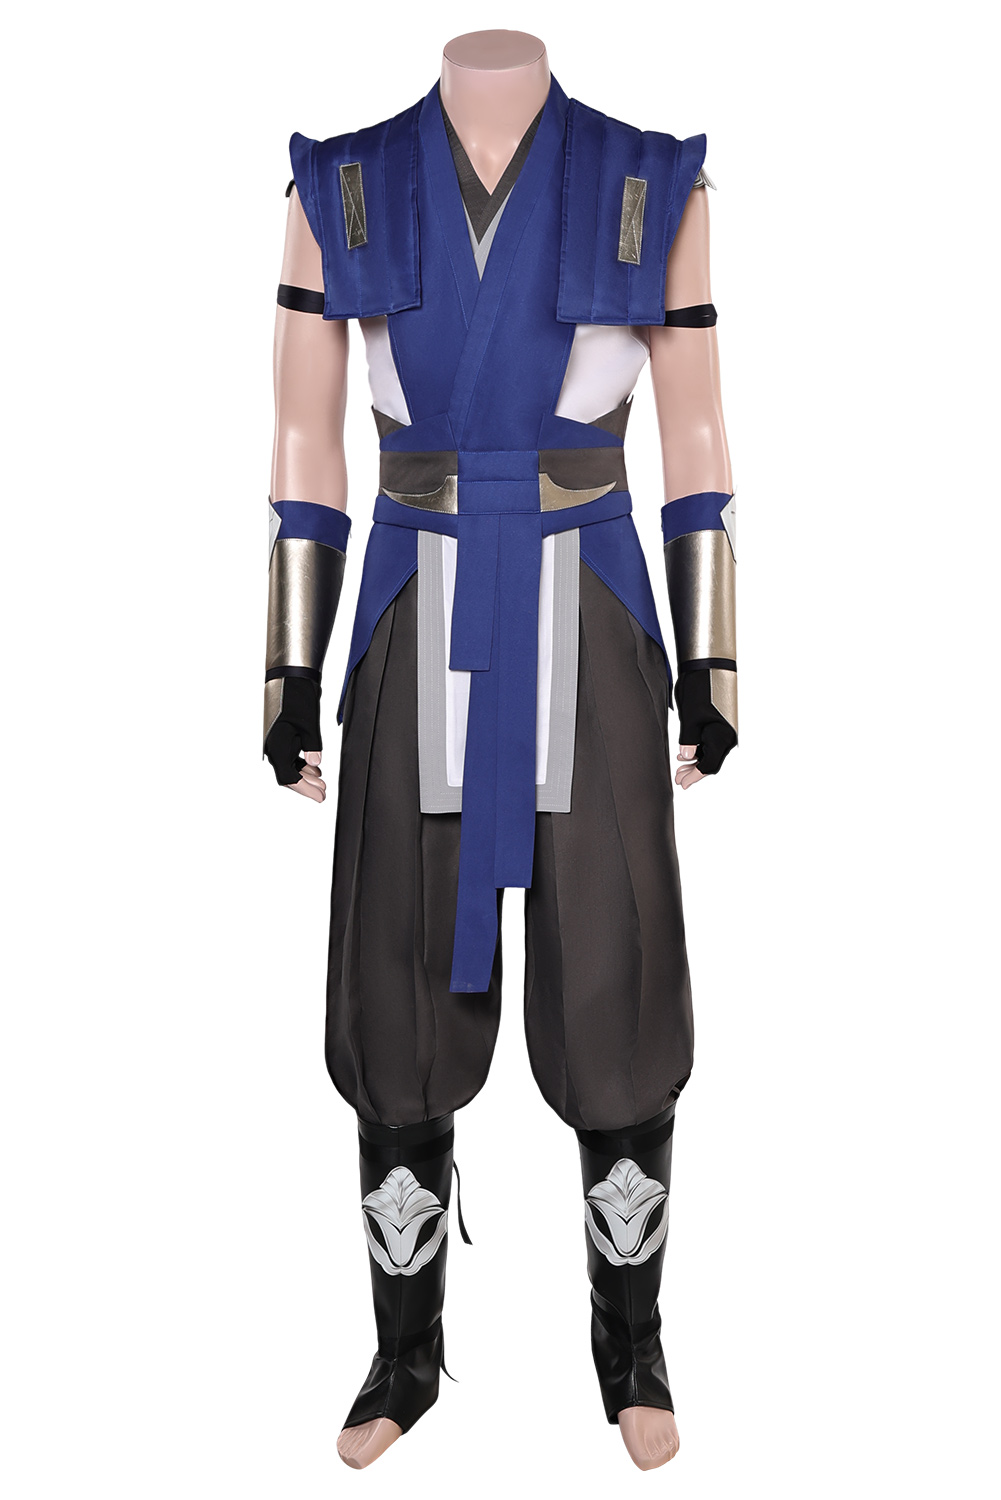 Game Mortal Kombat Sub Zero Outfits Halloween Carnival Suit Cosplay Costume